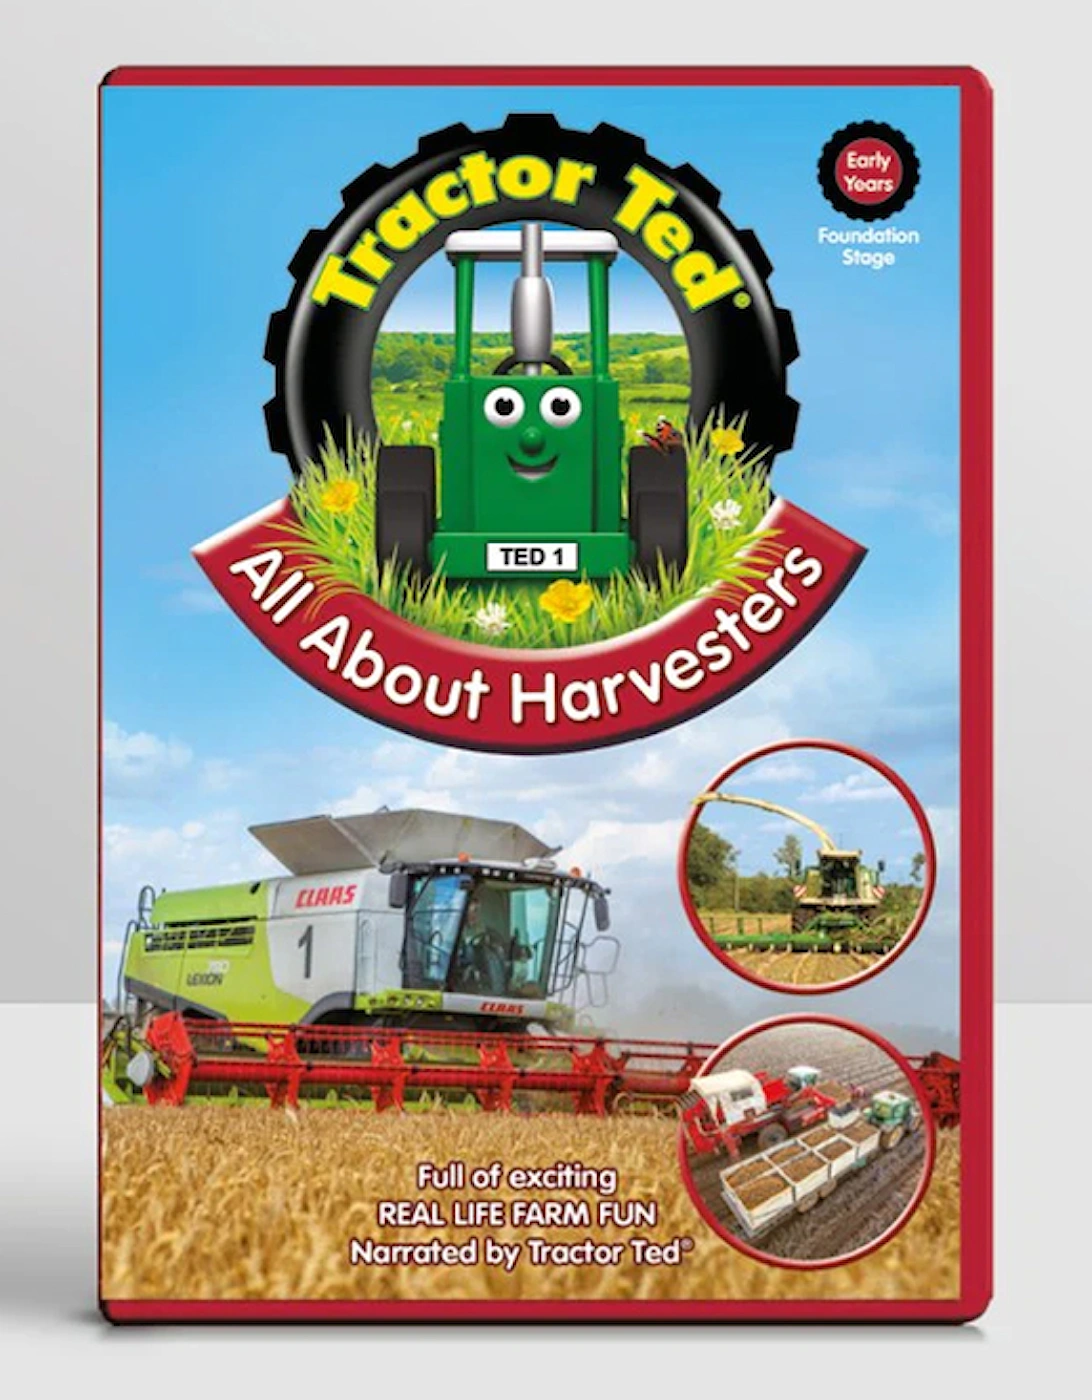 DVD - All About Harvesters, 2 of 1